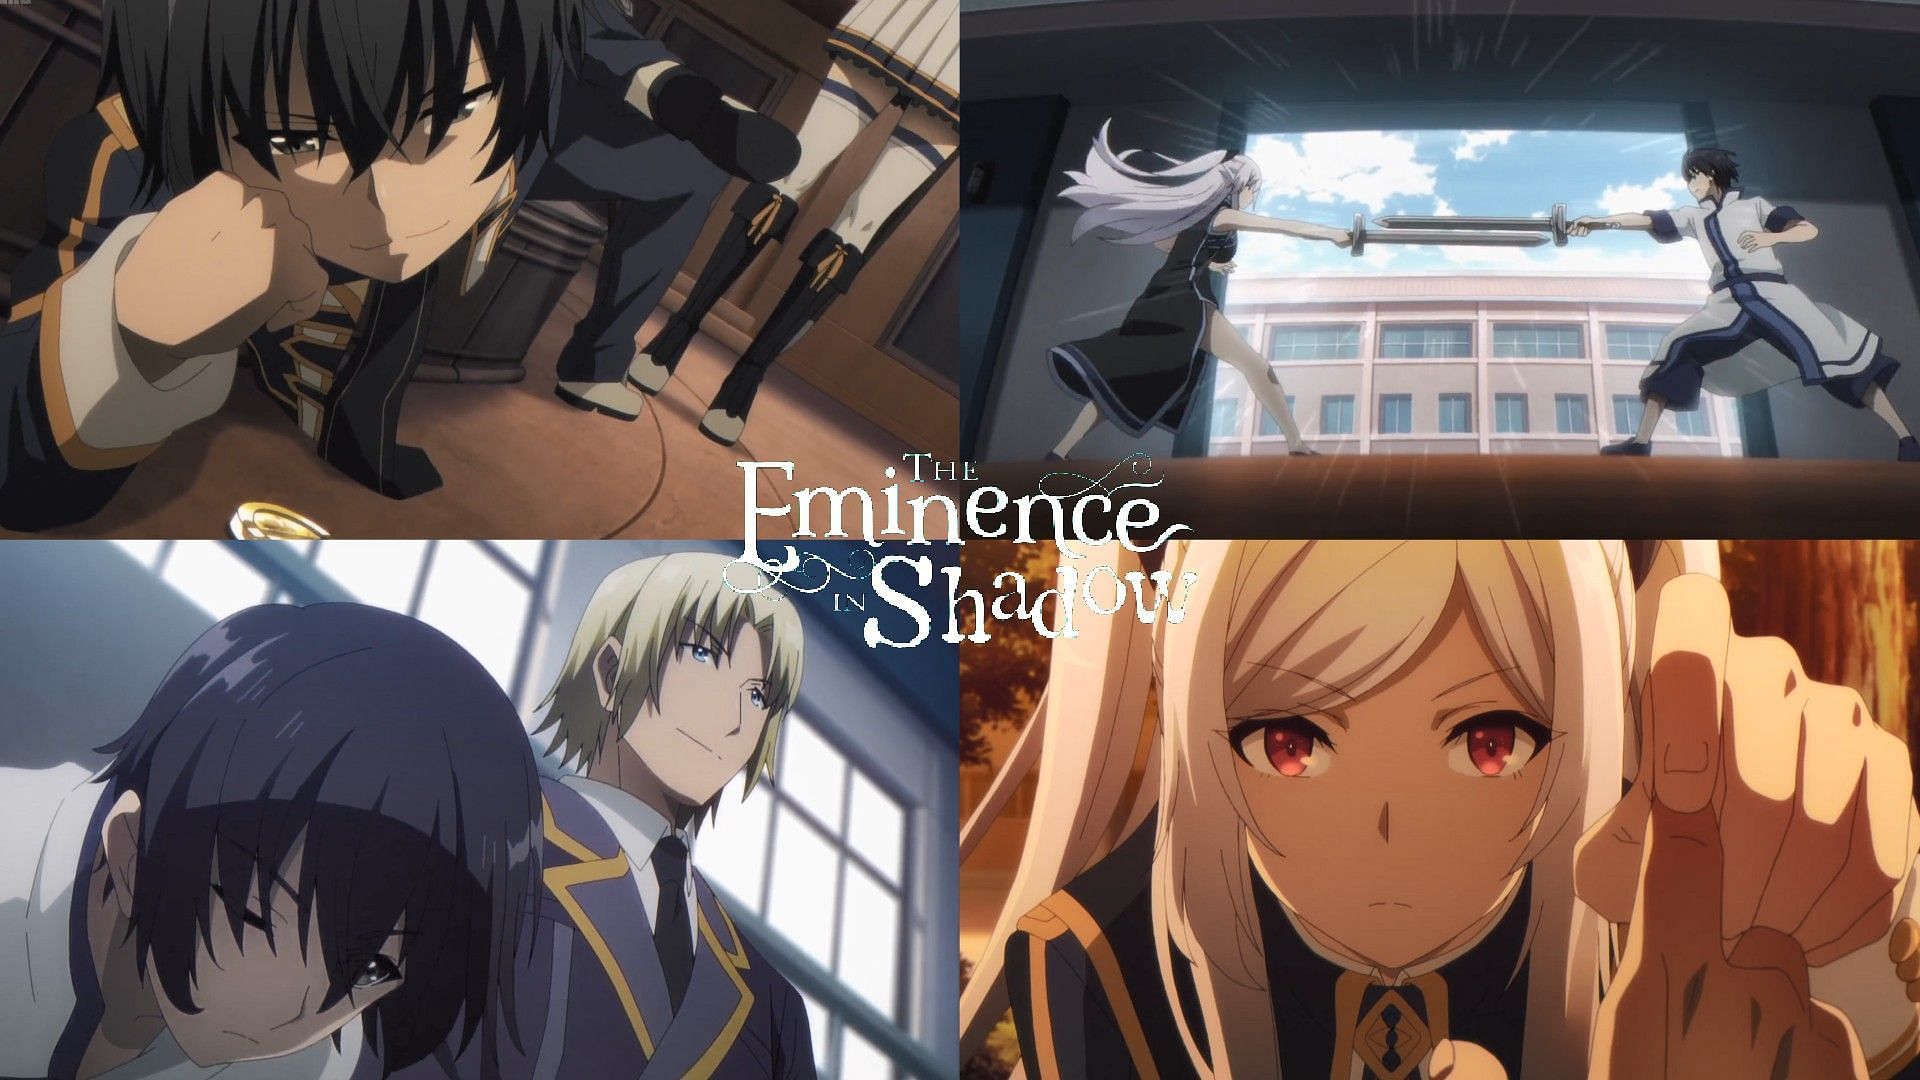 The Eminence in Shadow episode 3 review (Image via Nexus)